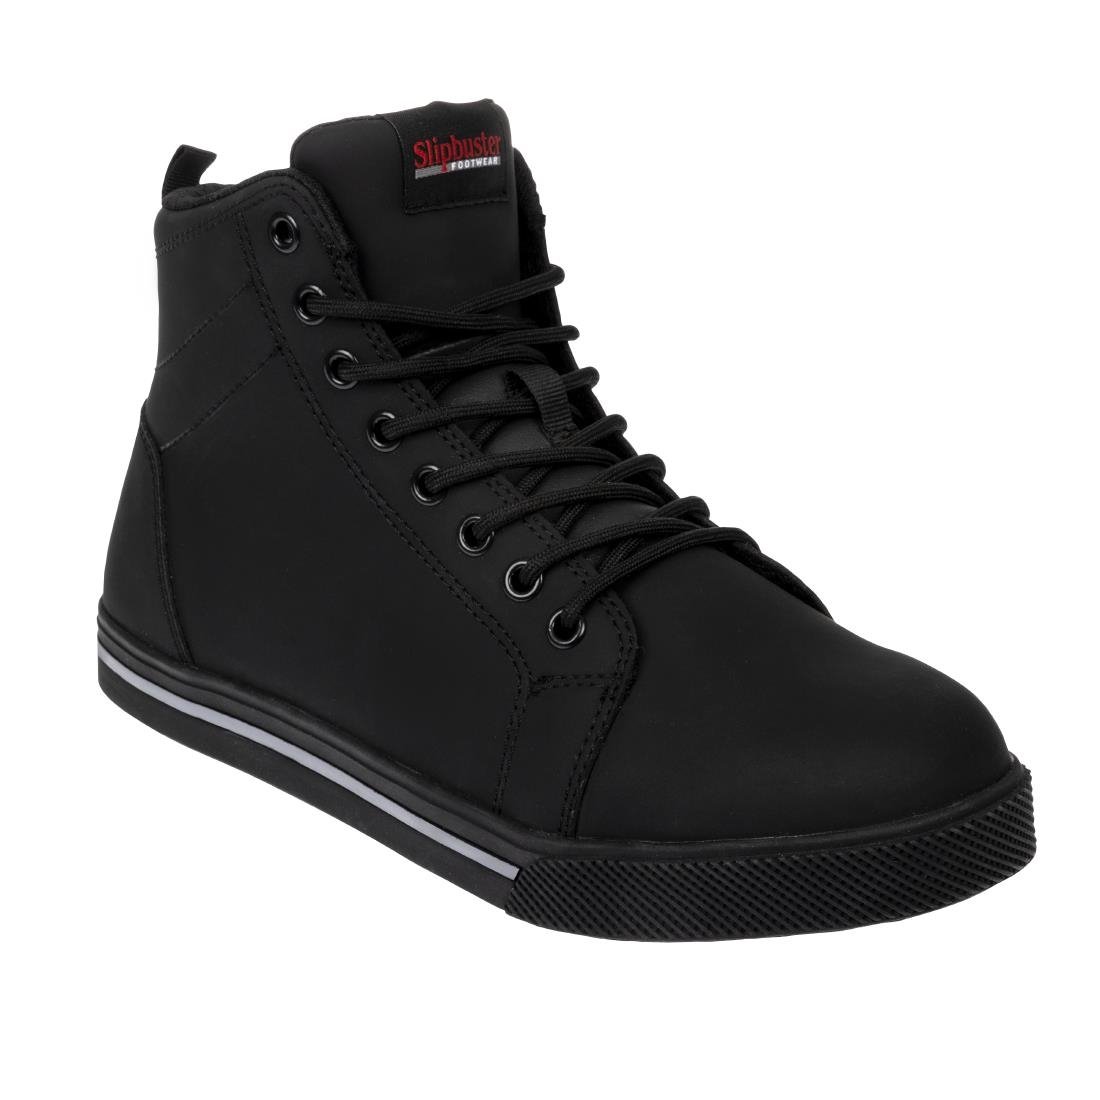 BA061-46 Slipbuster Recycled Microfibre Safety Hi Top Boots Matte Black 46 JD Catering Equipment Solutions Ltd